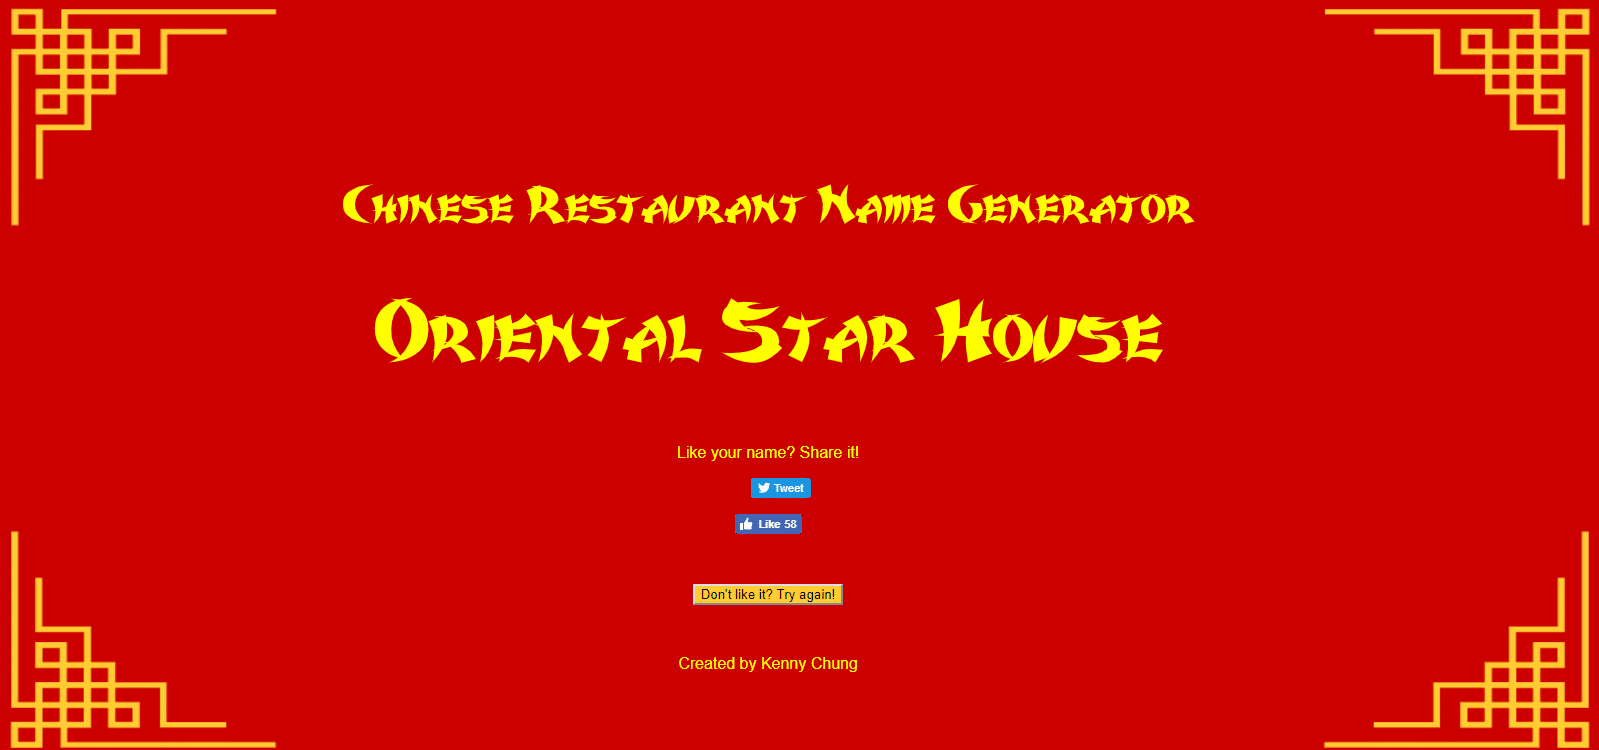 A screenshot of the Chinese restaurant name generator, showing the suggestion “Oriental Star House.”